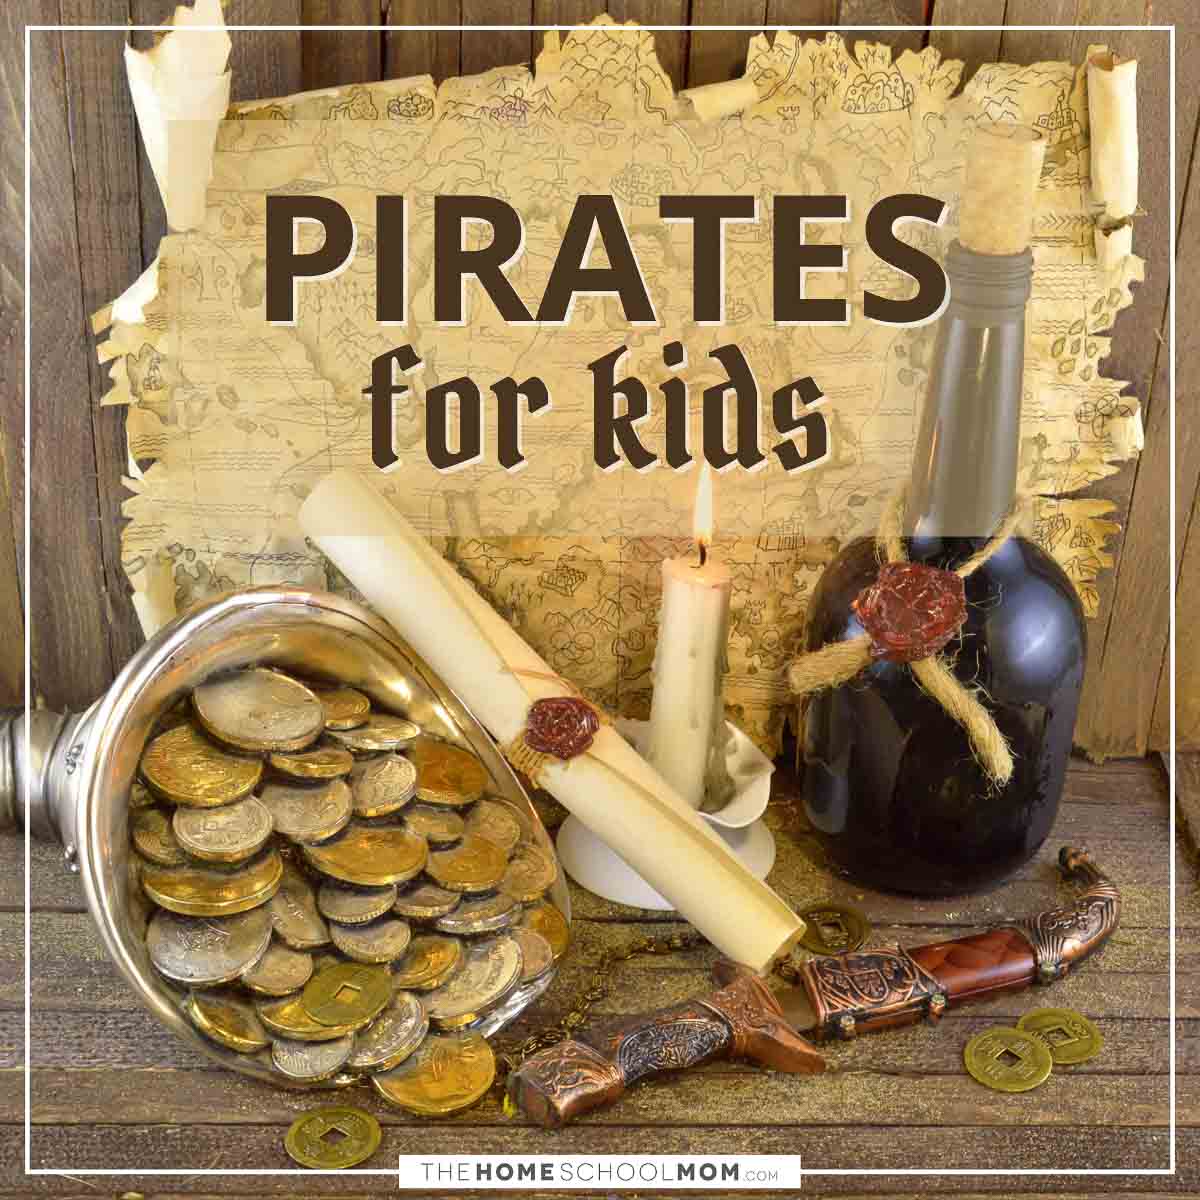 Pirates for Kids.